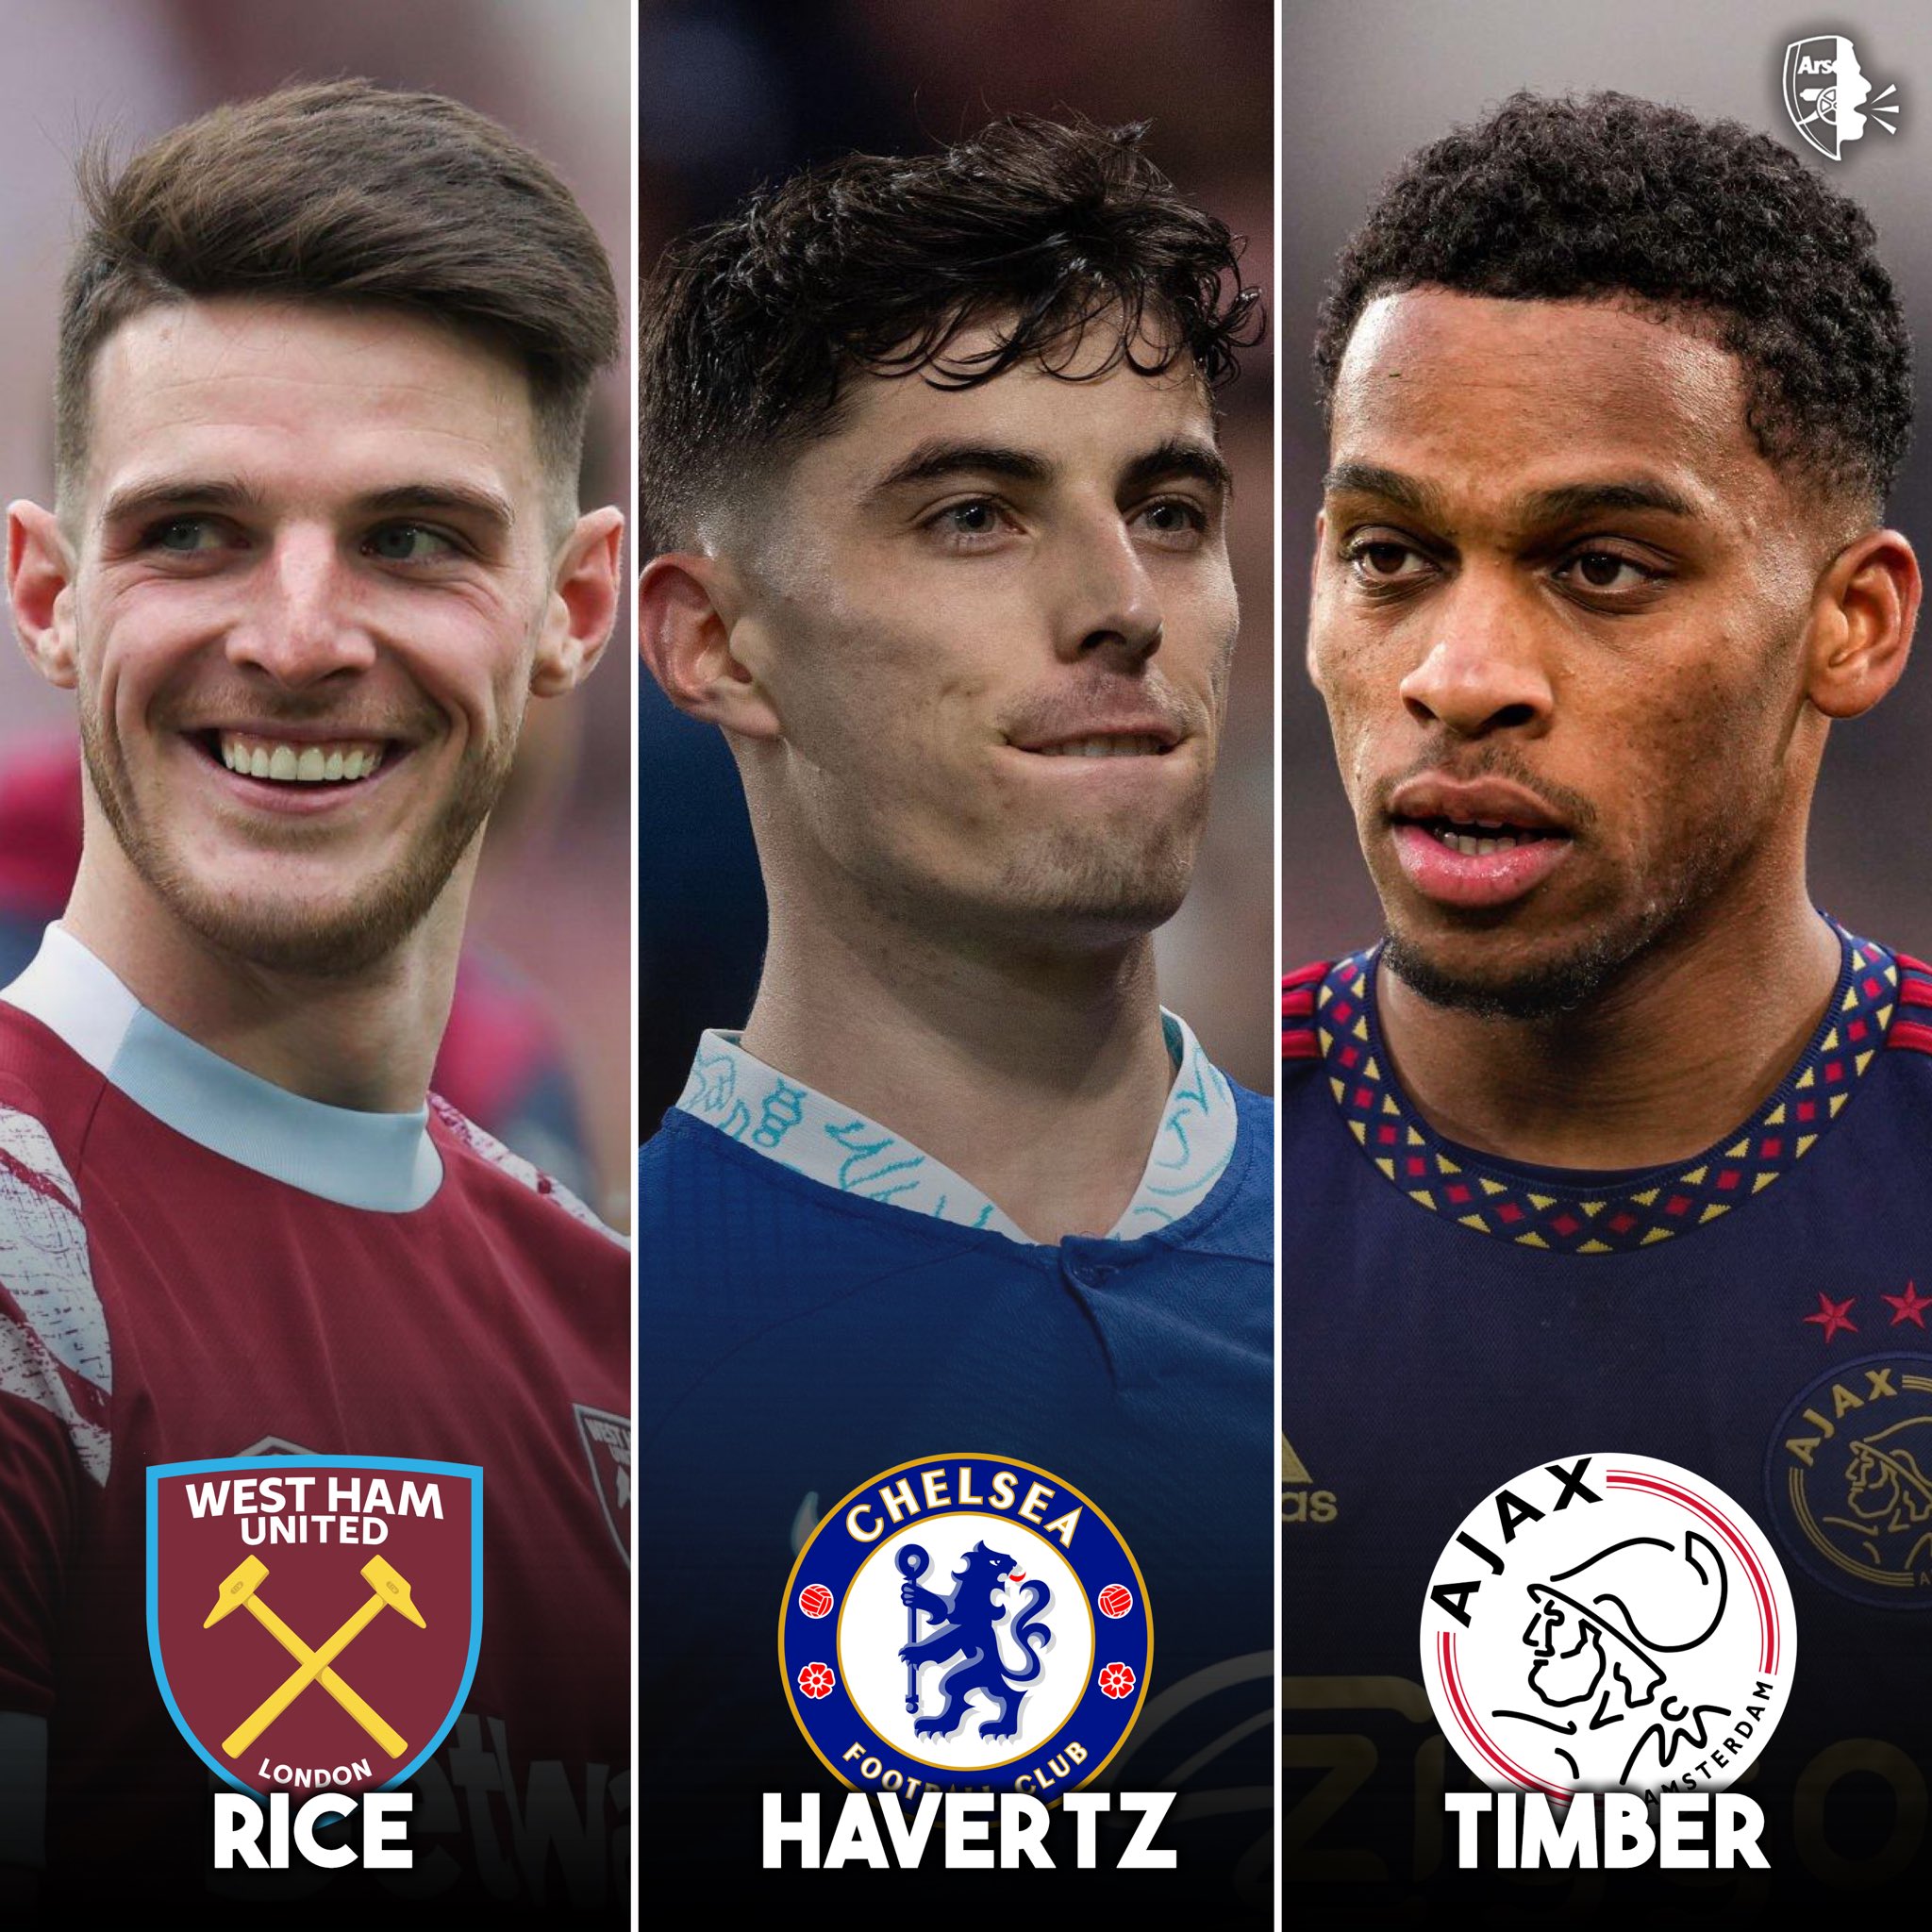 AFCTALK on Twitter: "🏴󠁧󠁢󠁥󠁮󠁧󠁿 Declan Rice 🇩🇪 Kai Havertz 🇳🇱  Jurrien Timber Arsenal are trying to move fast on their top targets this  summer… #AFC 😳 https://t.co/x71DfzPGrU" / Twitter